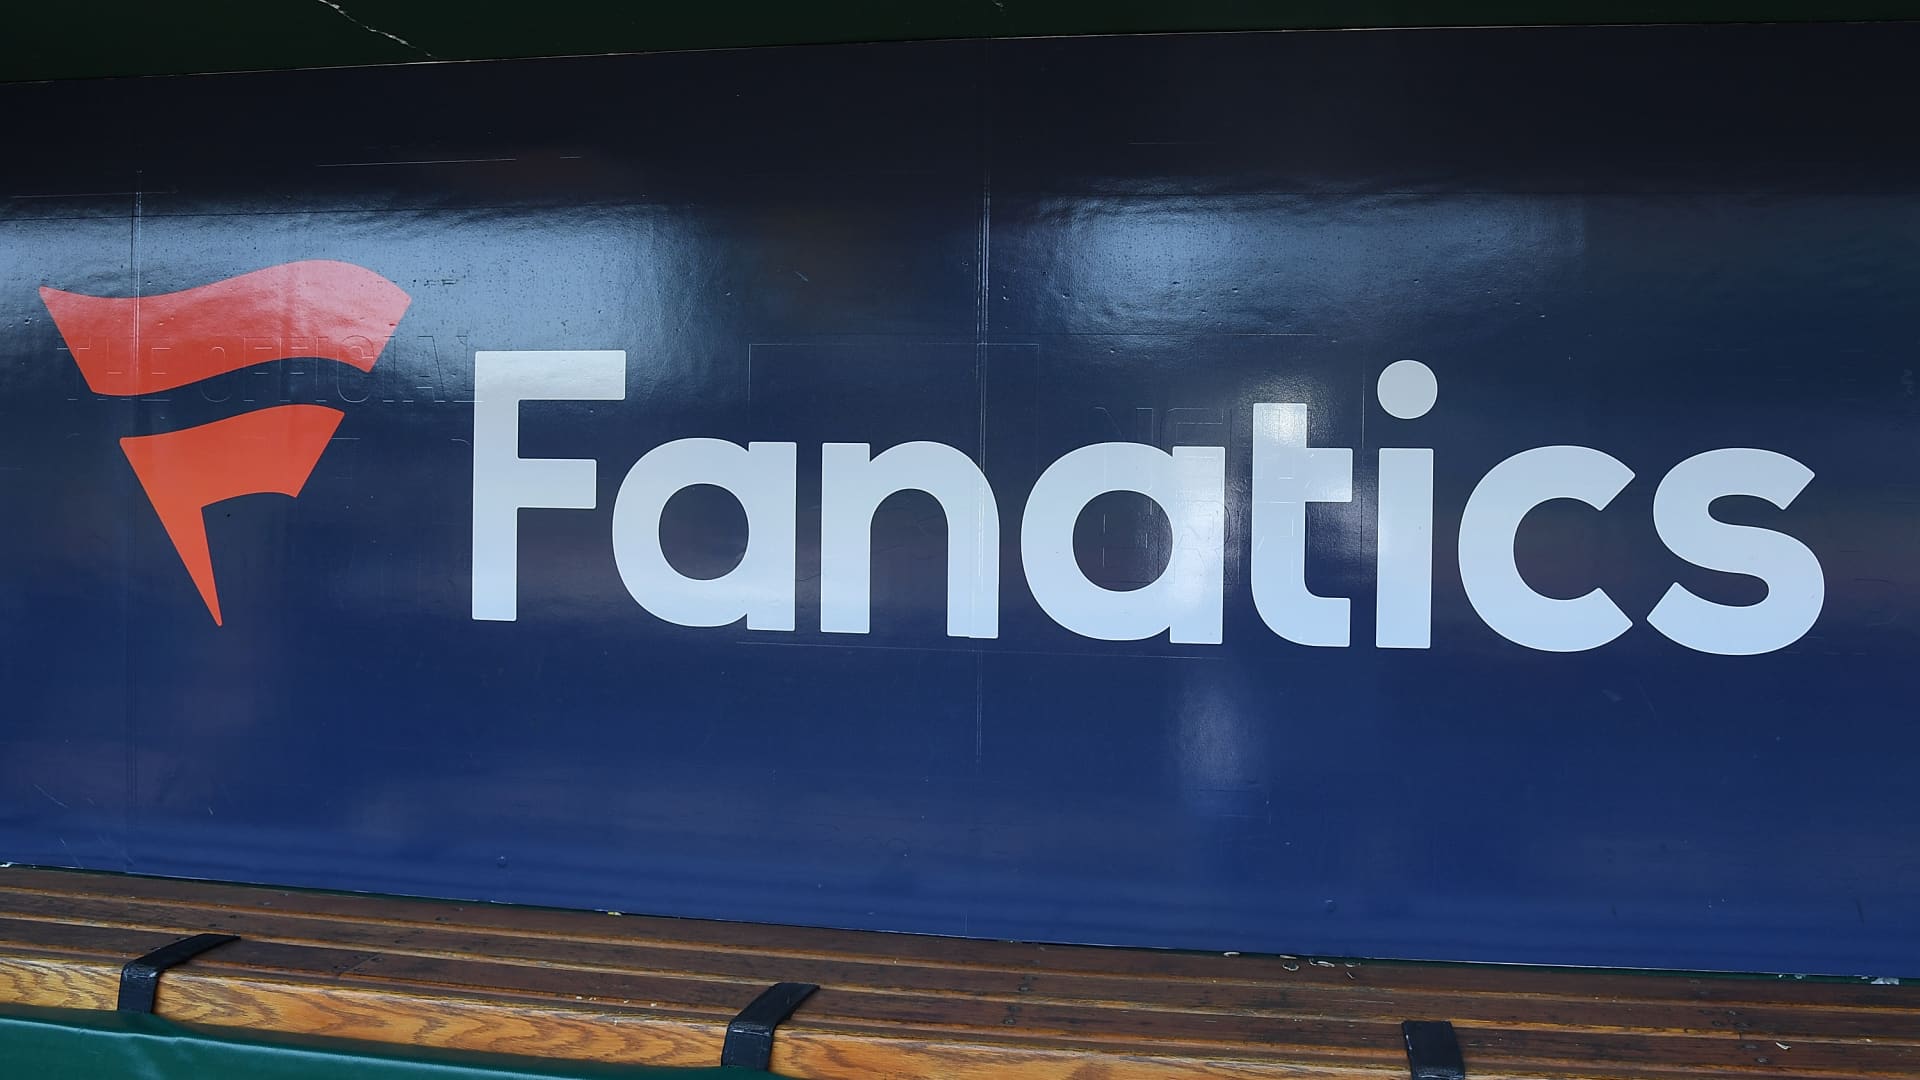 MLB All-Star Game, baseball playing cards, are first big test of Fanatics livestream shopping experience